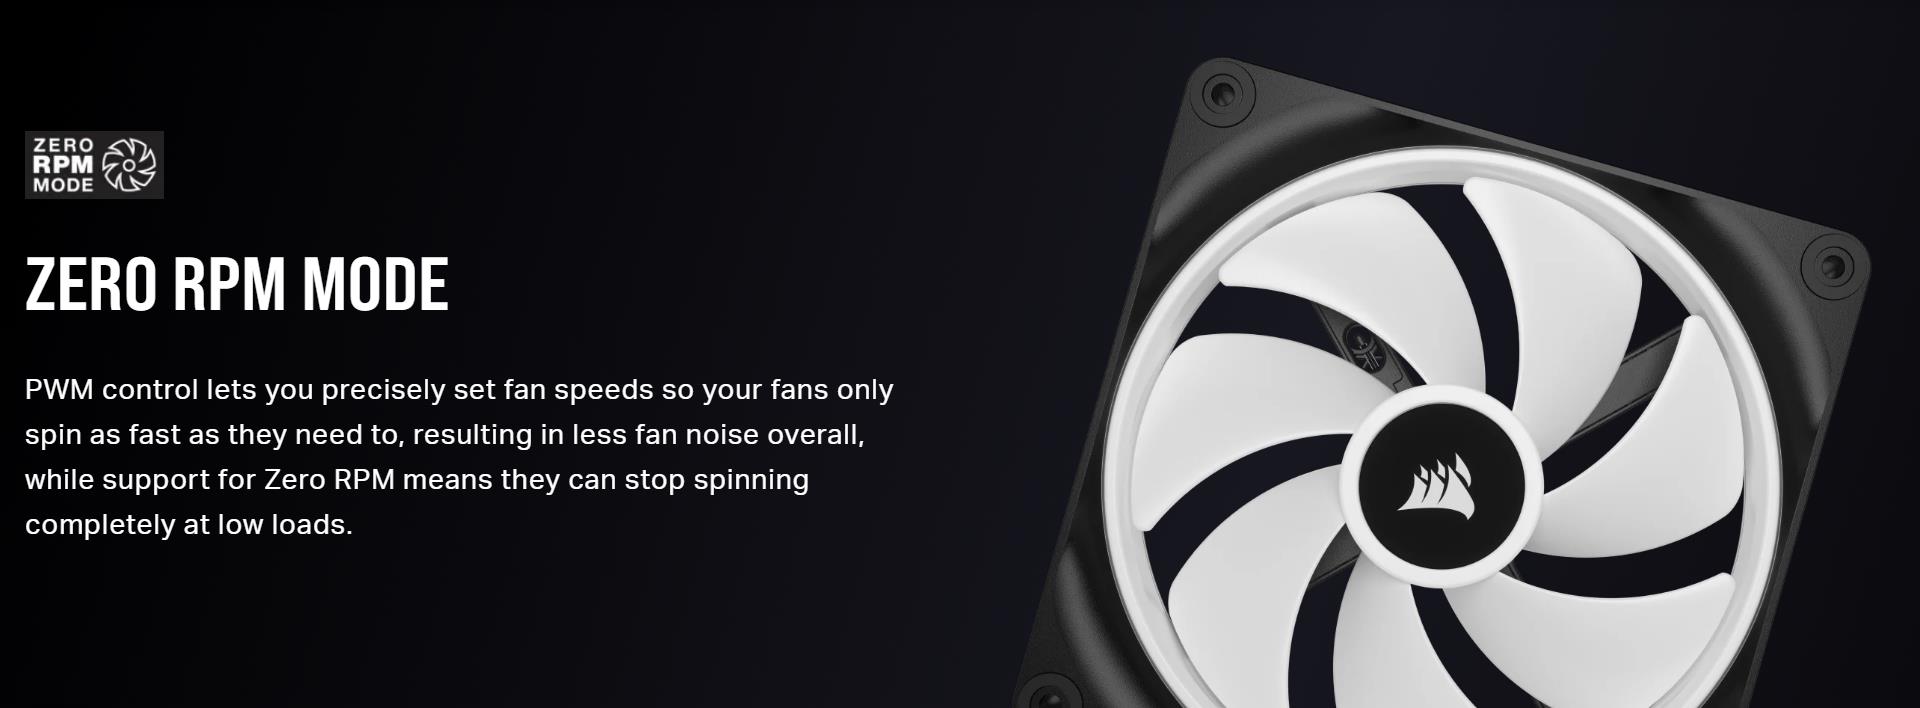 A large marketing image providing additional information about the product Corsair iCUE LINK QX140 RGB 140mm PWM Dual Fan Kit - White - Additional alt info not provided